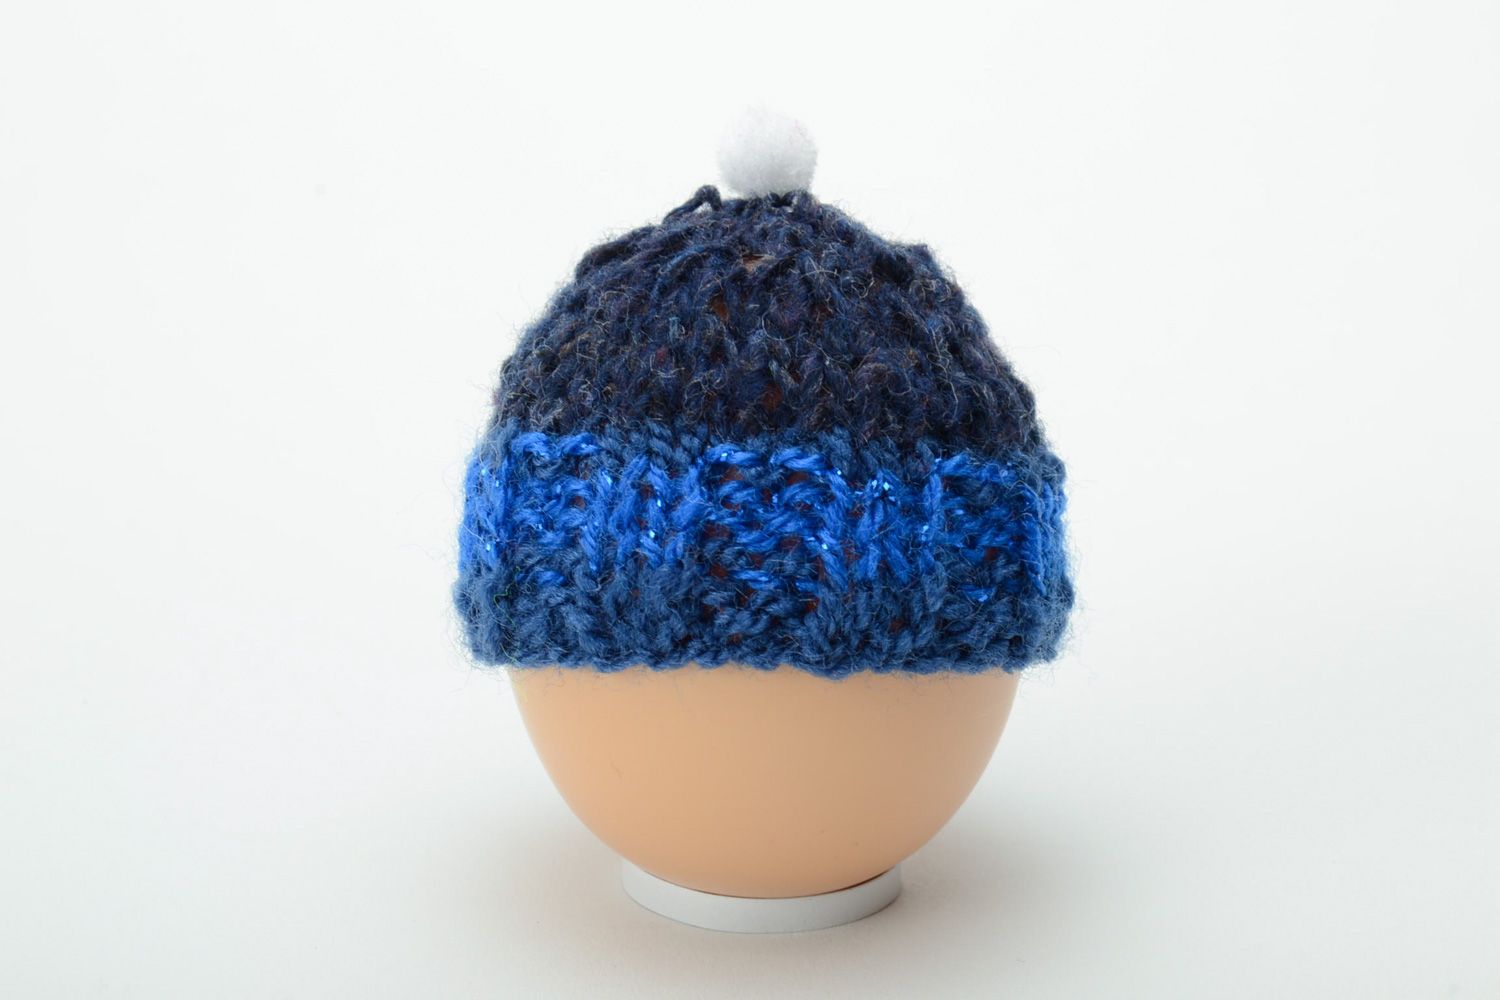 Knitted dark blue hat for a baby toy. Two inches in diameter photo 2